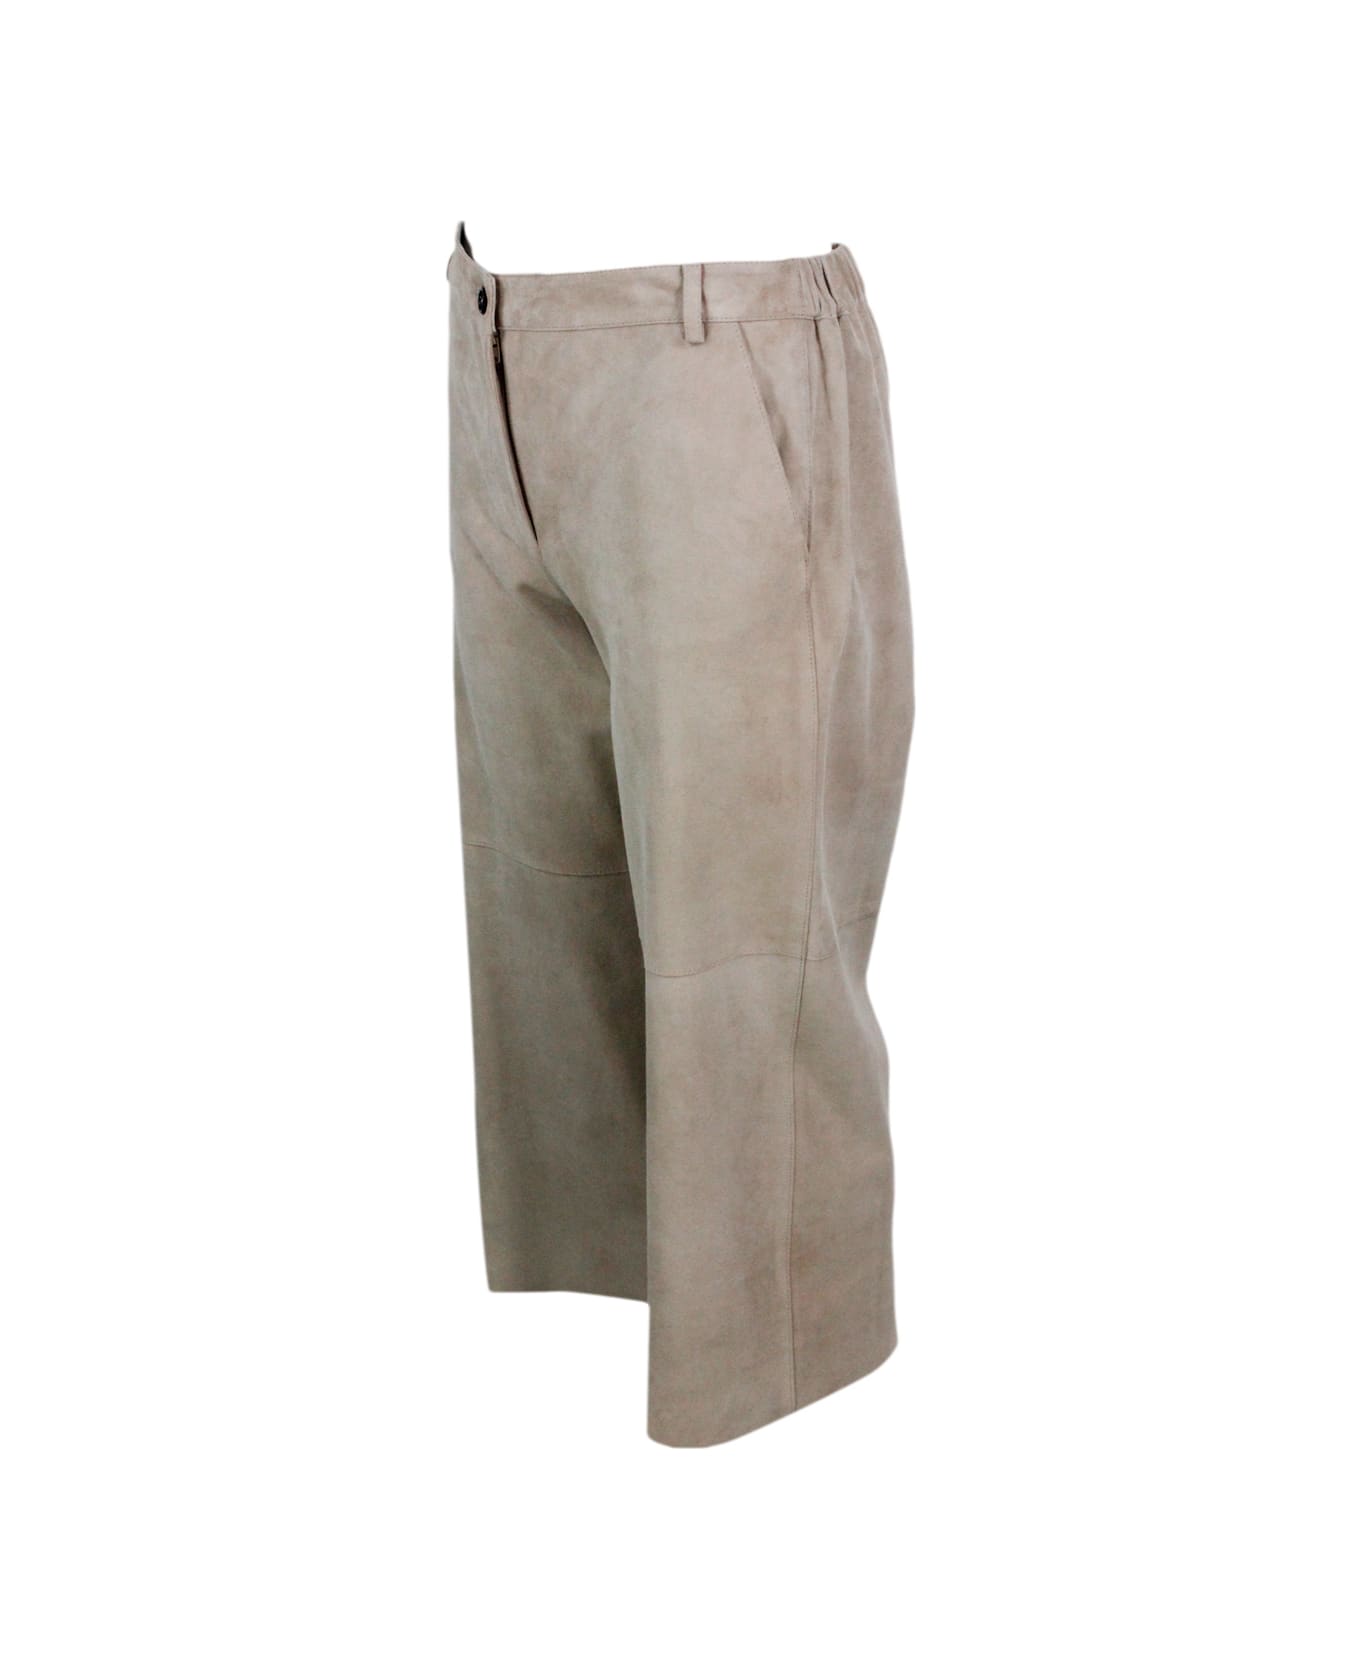 Antonelli Trousers Made Of Soft Suede, With A Soft Fit And Zip And Button Closure With Elastic Waist On The Back. Welt Pockets. - Beige ボトムス